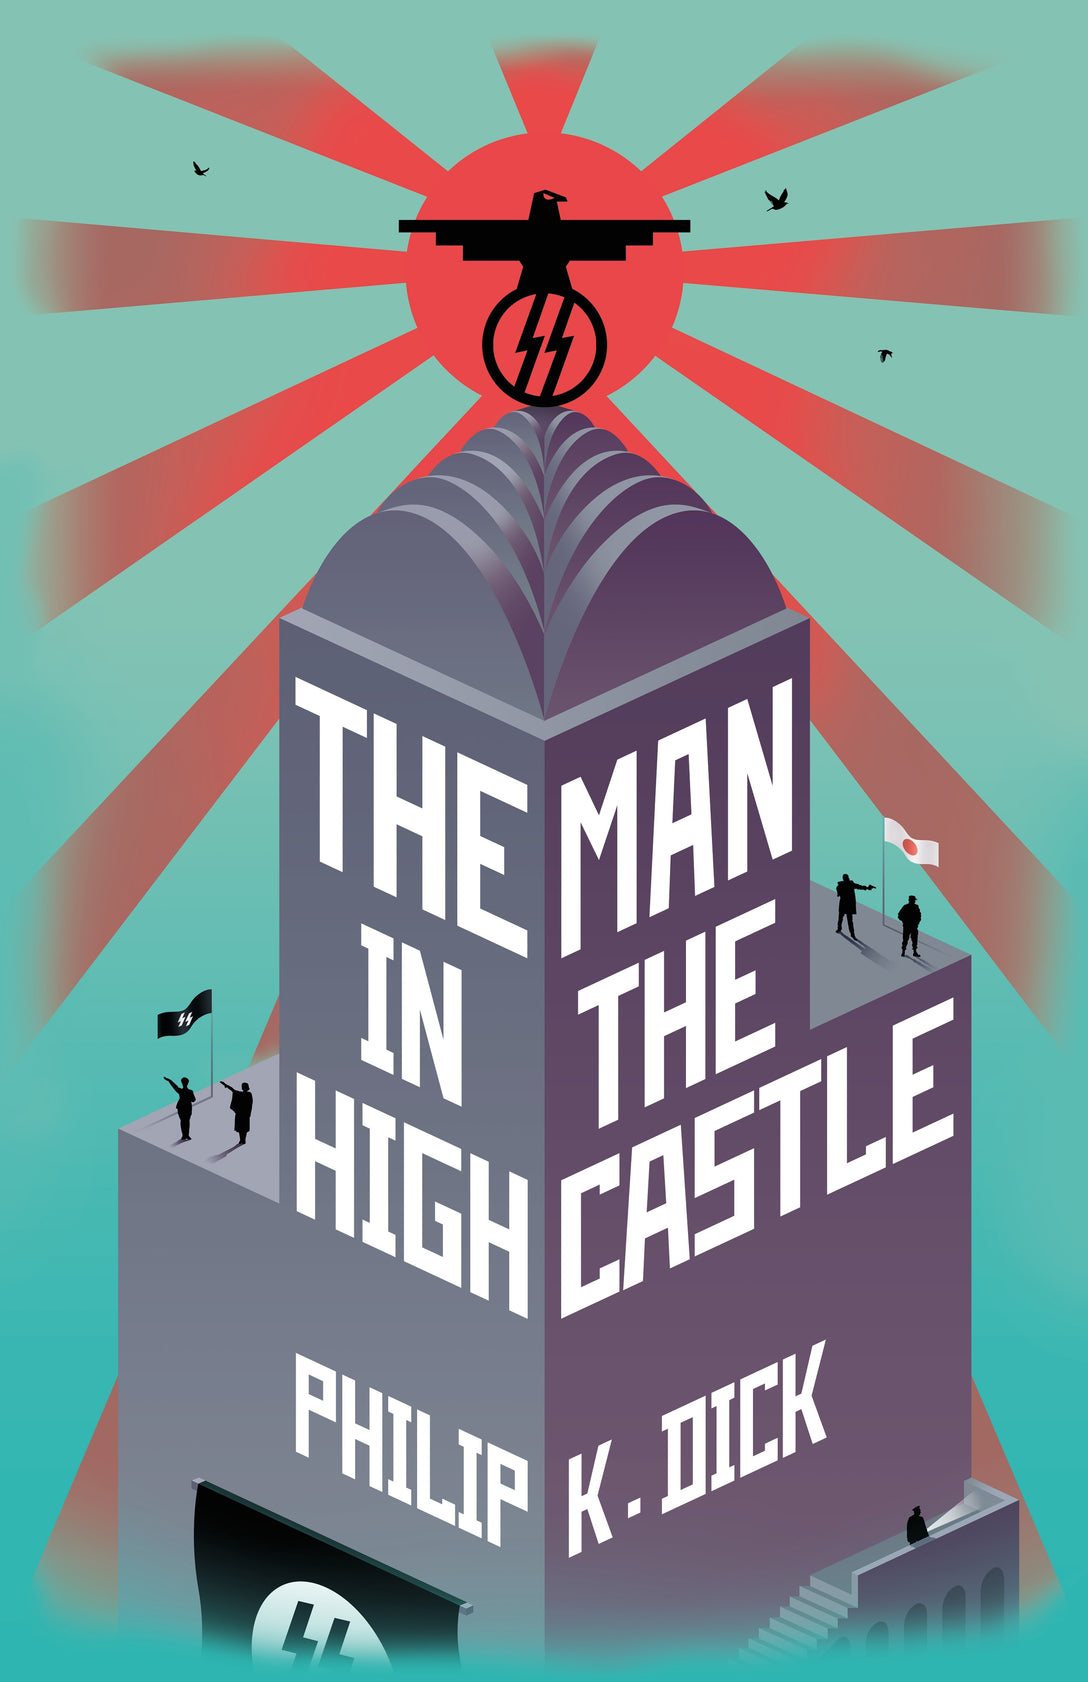 The Man In The High Castle by Philip K Dick